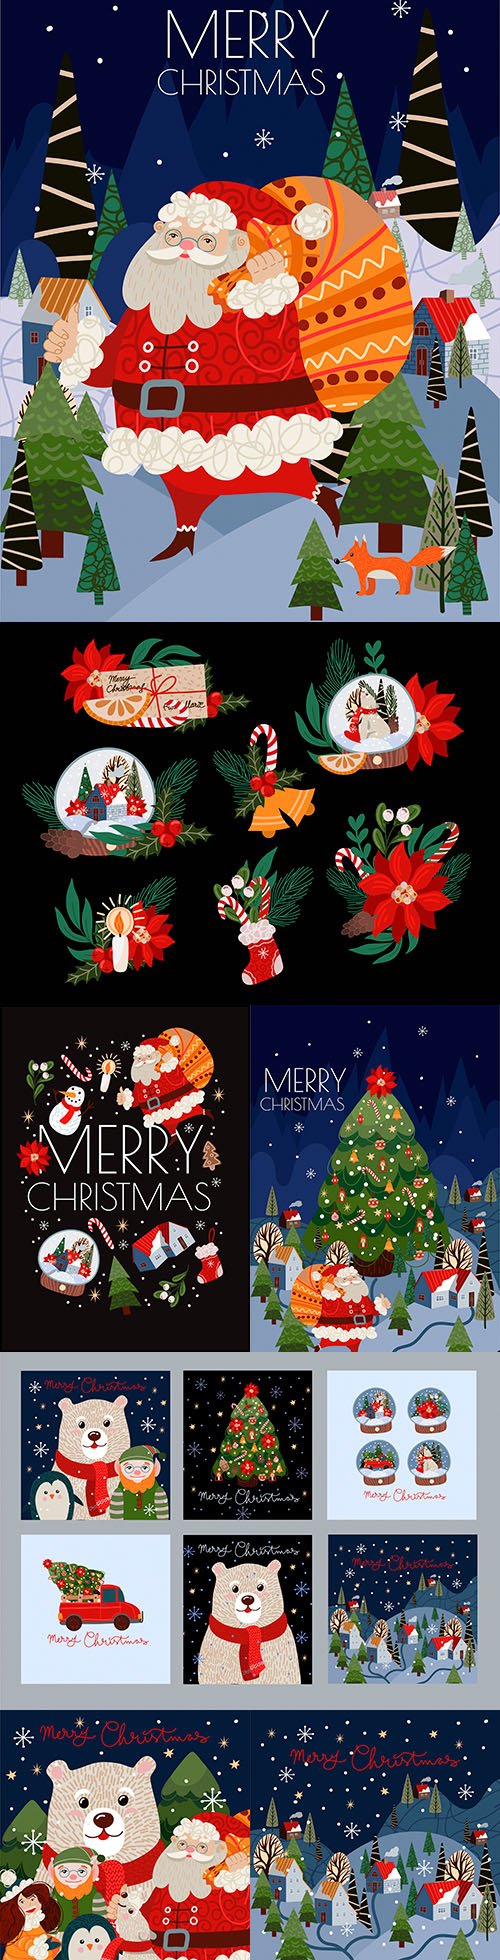 Merry Christmas themed painted illustrations